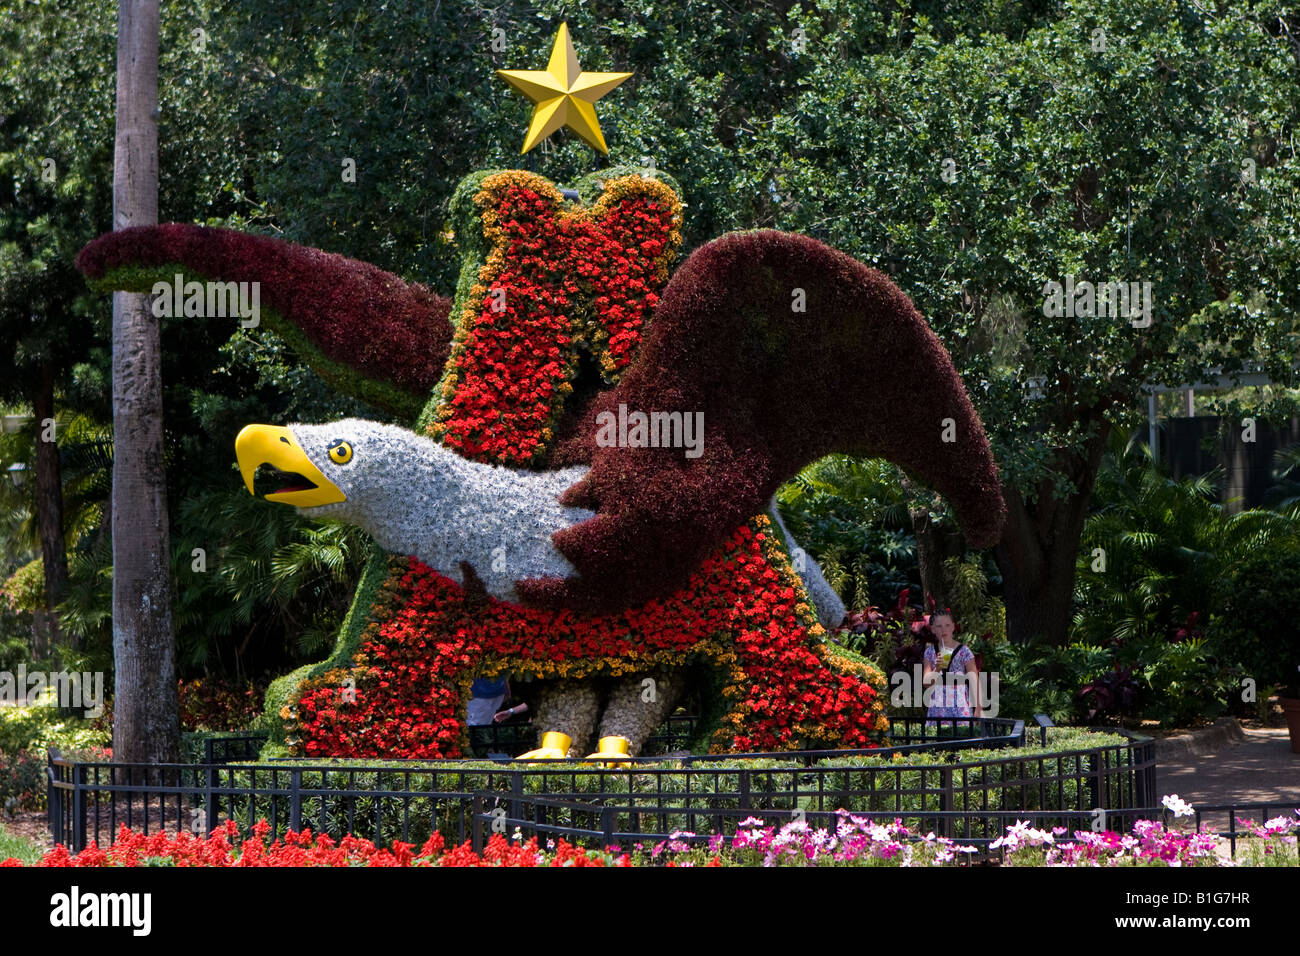 Anheuser Busch Eagle Logo Made with Flowers and on Display at Busch Gardens Africa, in Tampa Florida USA Stock Photo